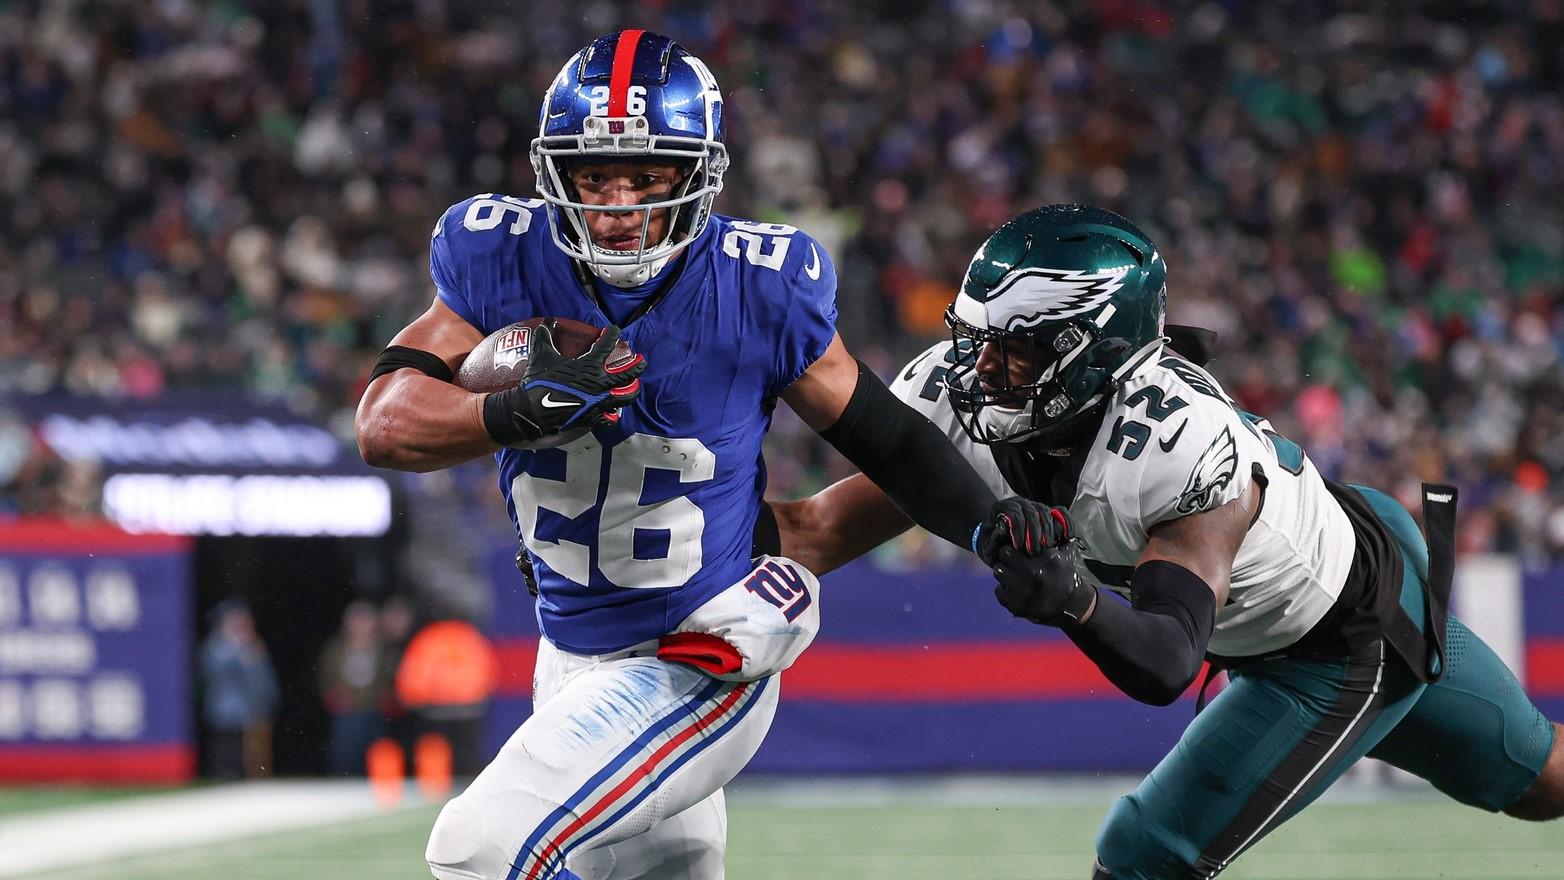 Jan 7, 2024; East Rutherford, New Jersey, USA; New York Giants running back Saquon Barkley (26) breaks a tackle by Philadelphia Eagles linebacker Zach Cunningham (52) for a rushing touchdown during the first half at MetLife Stadium. / Vincent Carchietta-USA TODAY Sports